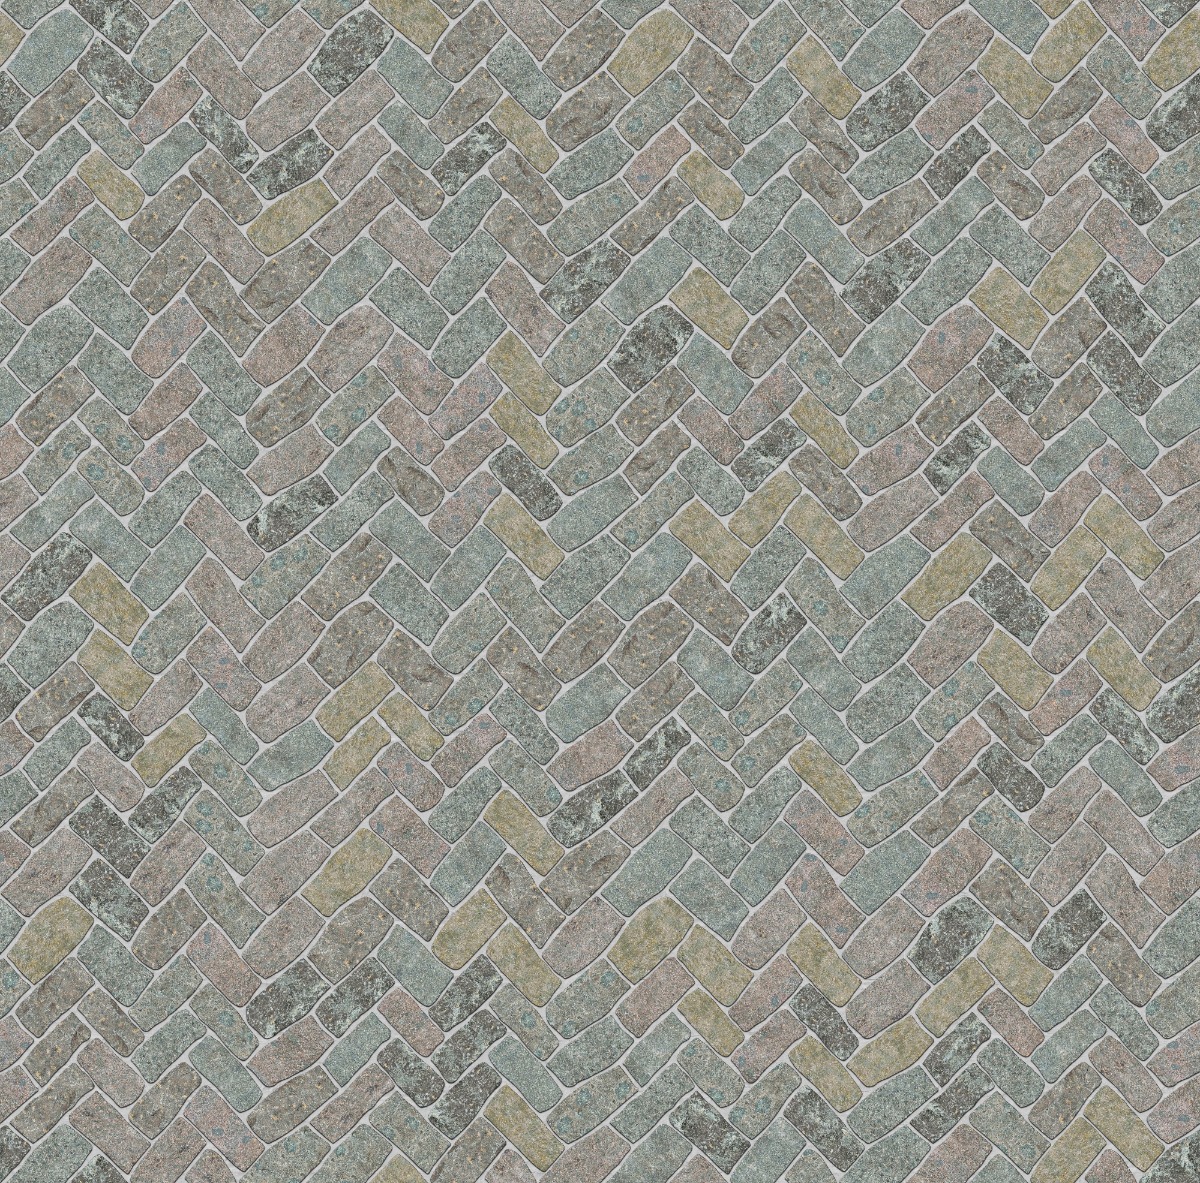 A seamless stone texture with porphyry - reclaimed european cobbles - weathered & worn surface - m267 blocks arranged in a Cobblestone Herringbone Pattern - Narrow Side Up - DP055 pattern